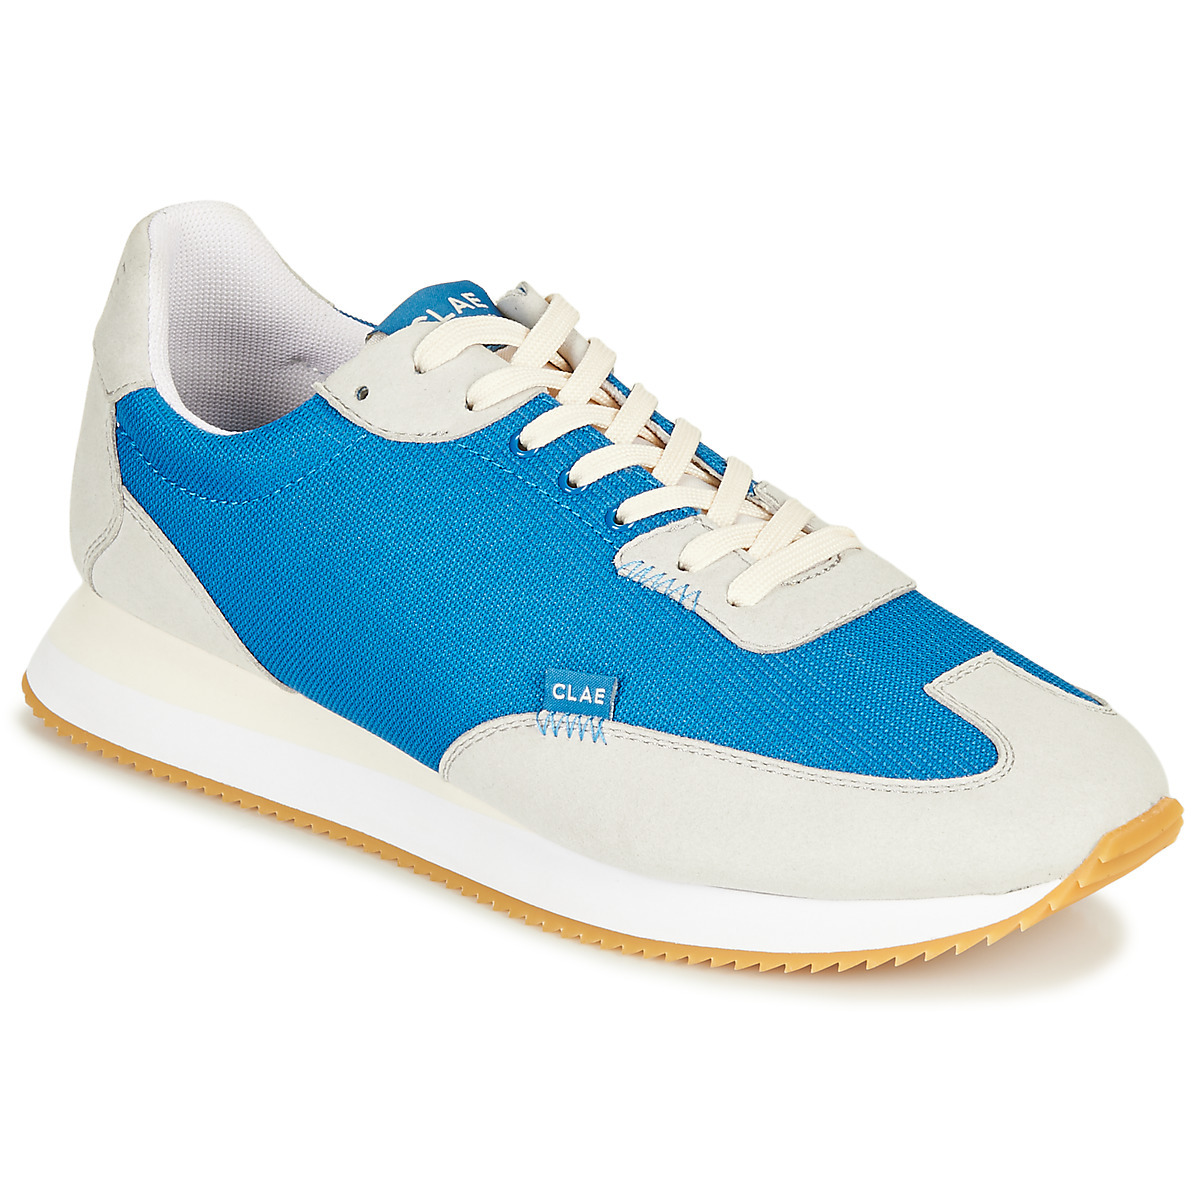 Clae Lady Blue Sneakers at Spartoo GOOFASH